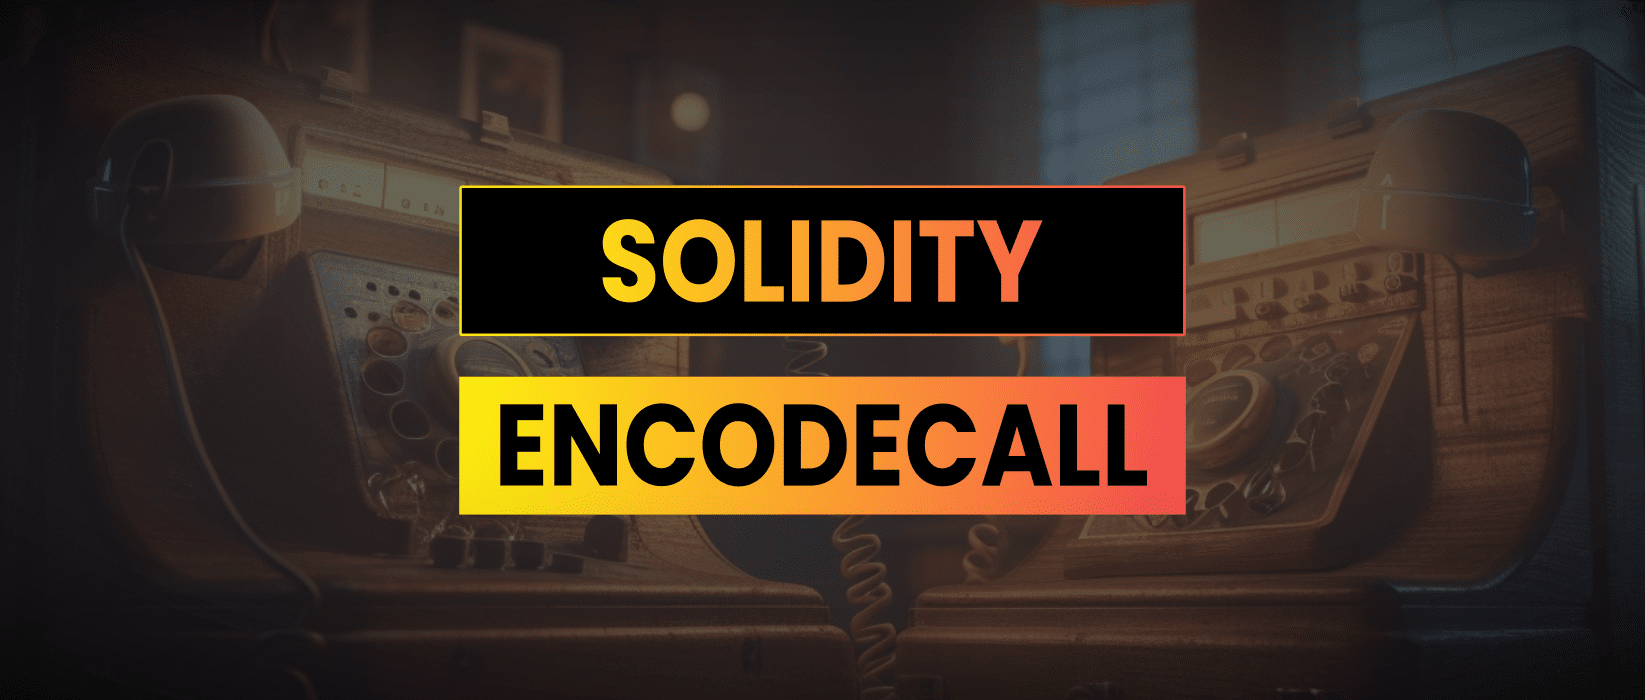 encodeCall solidity